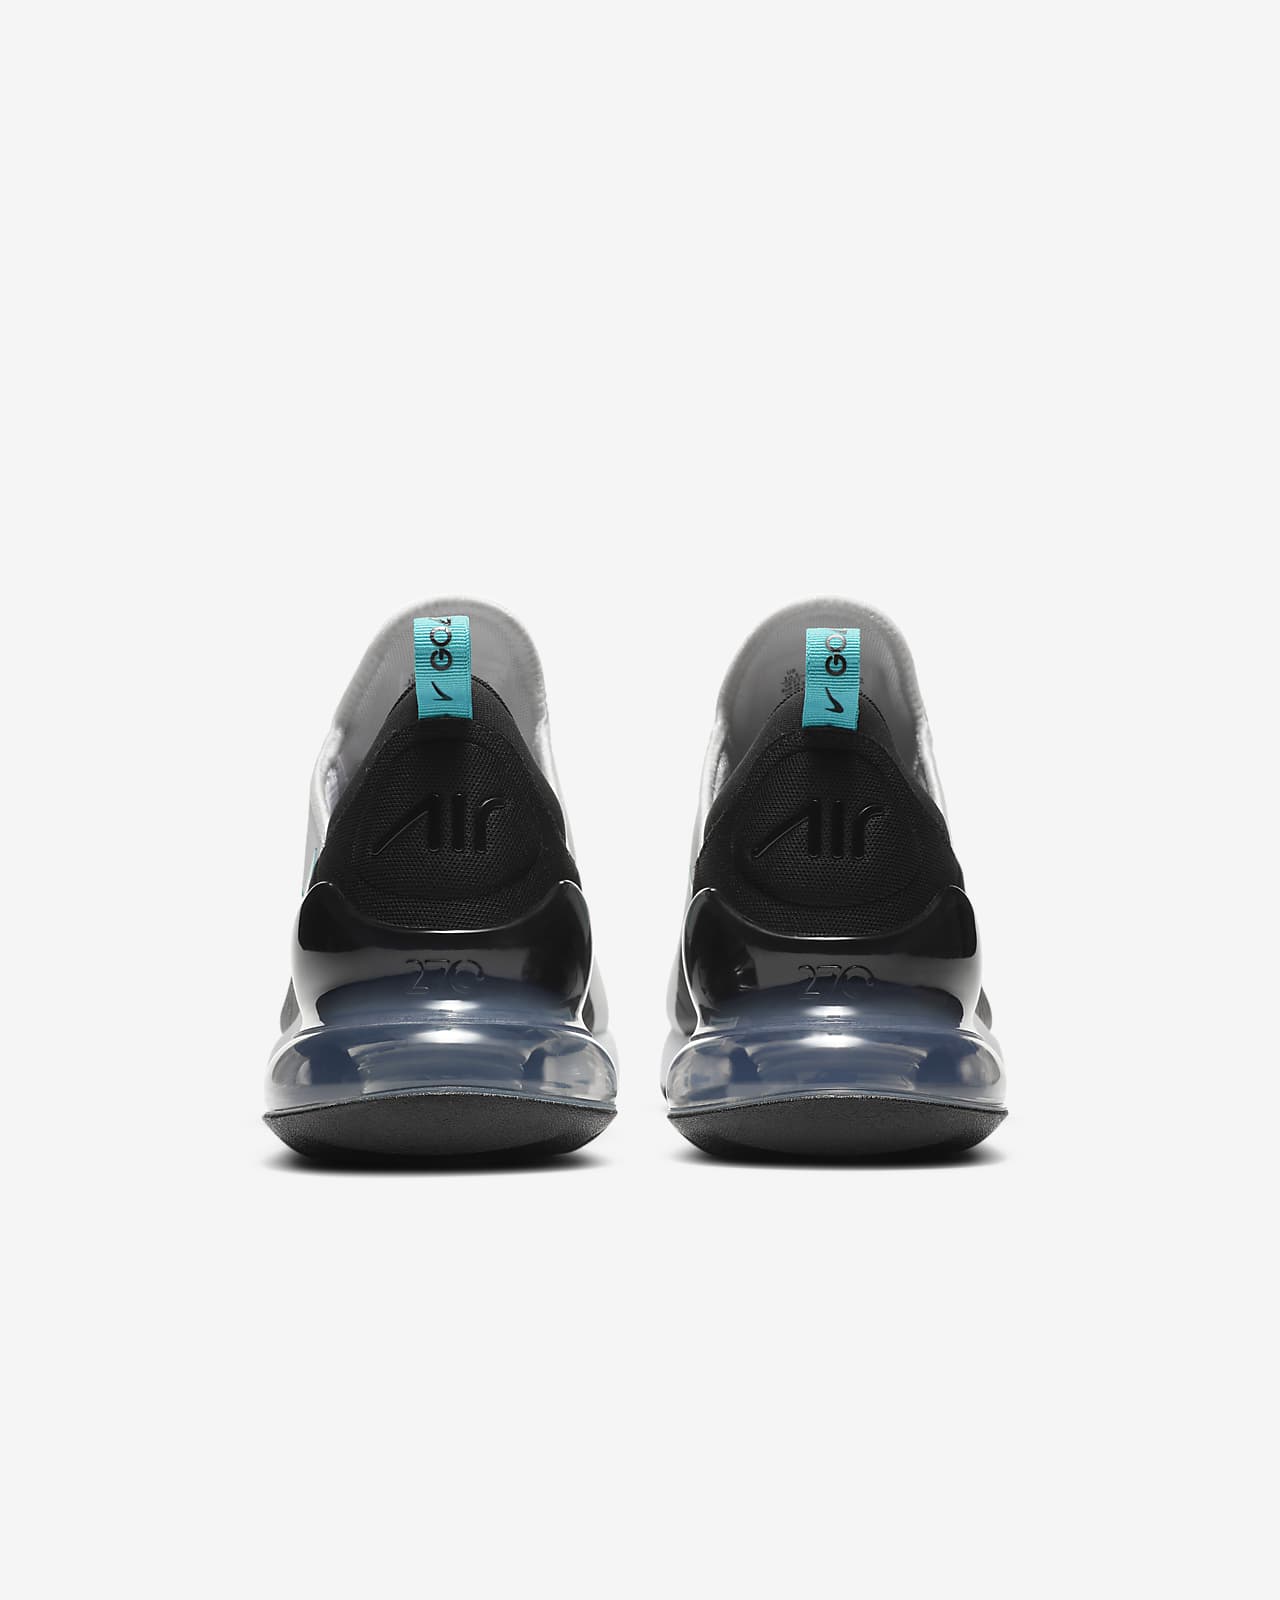 nike air max 270 turquoise and black